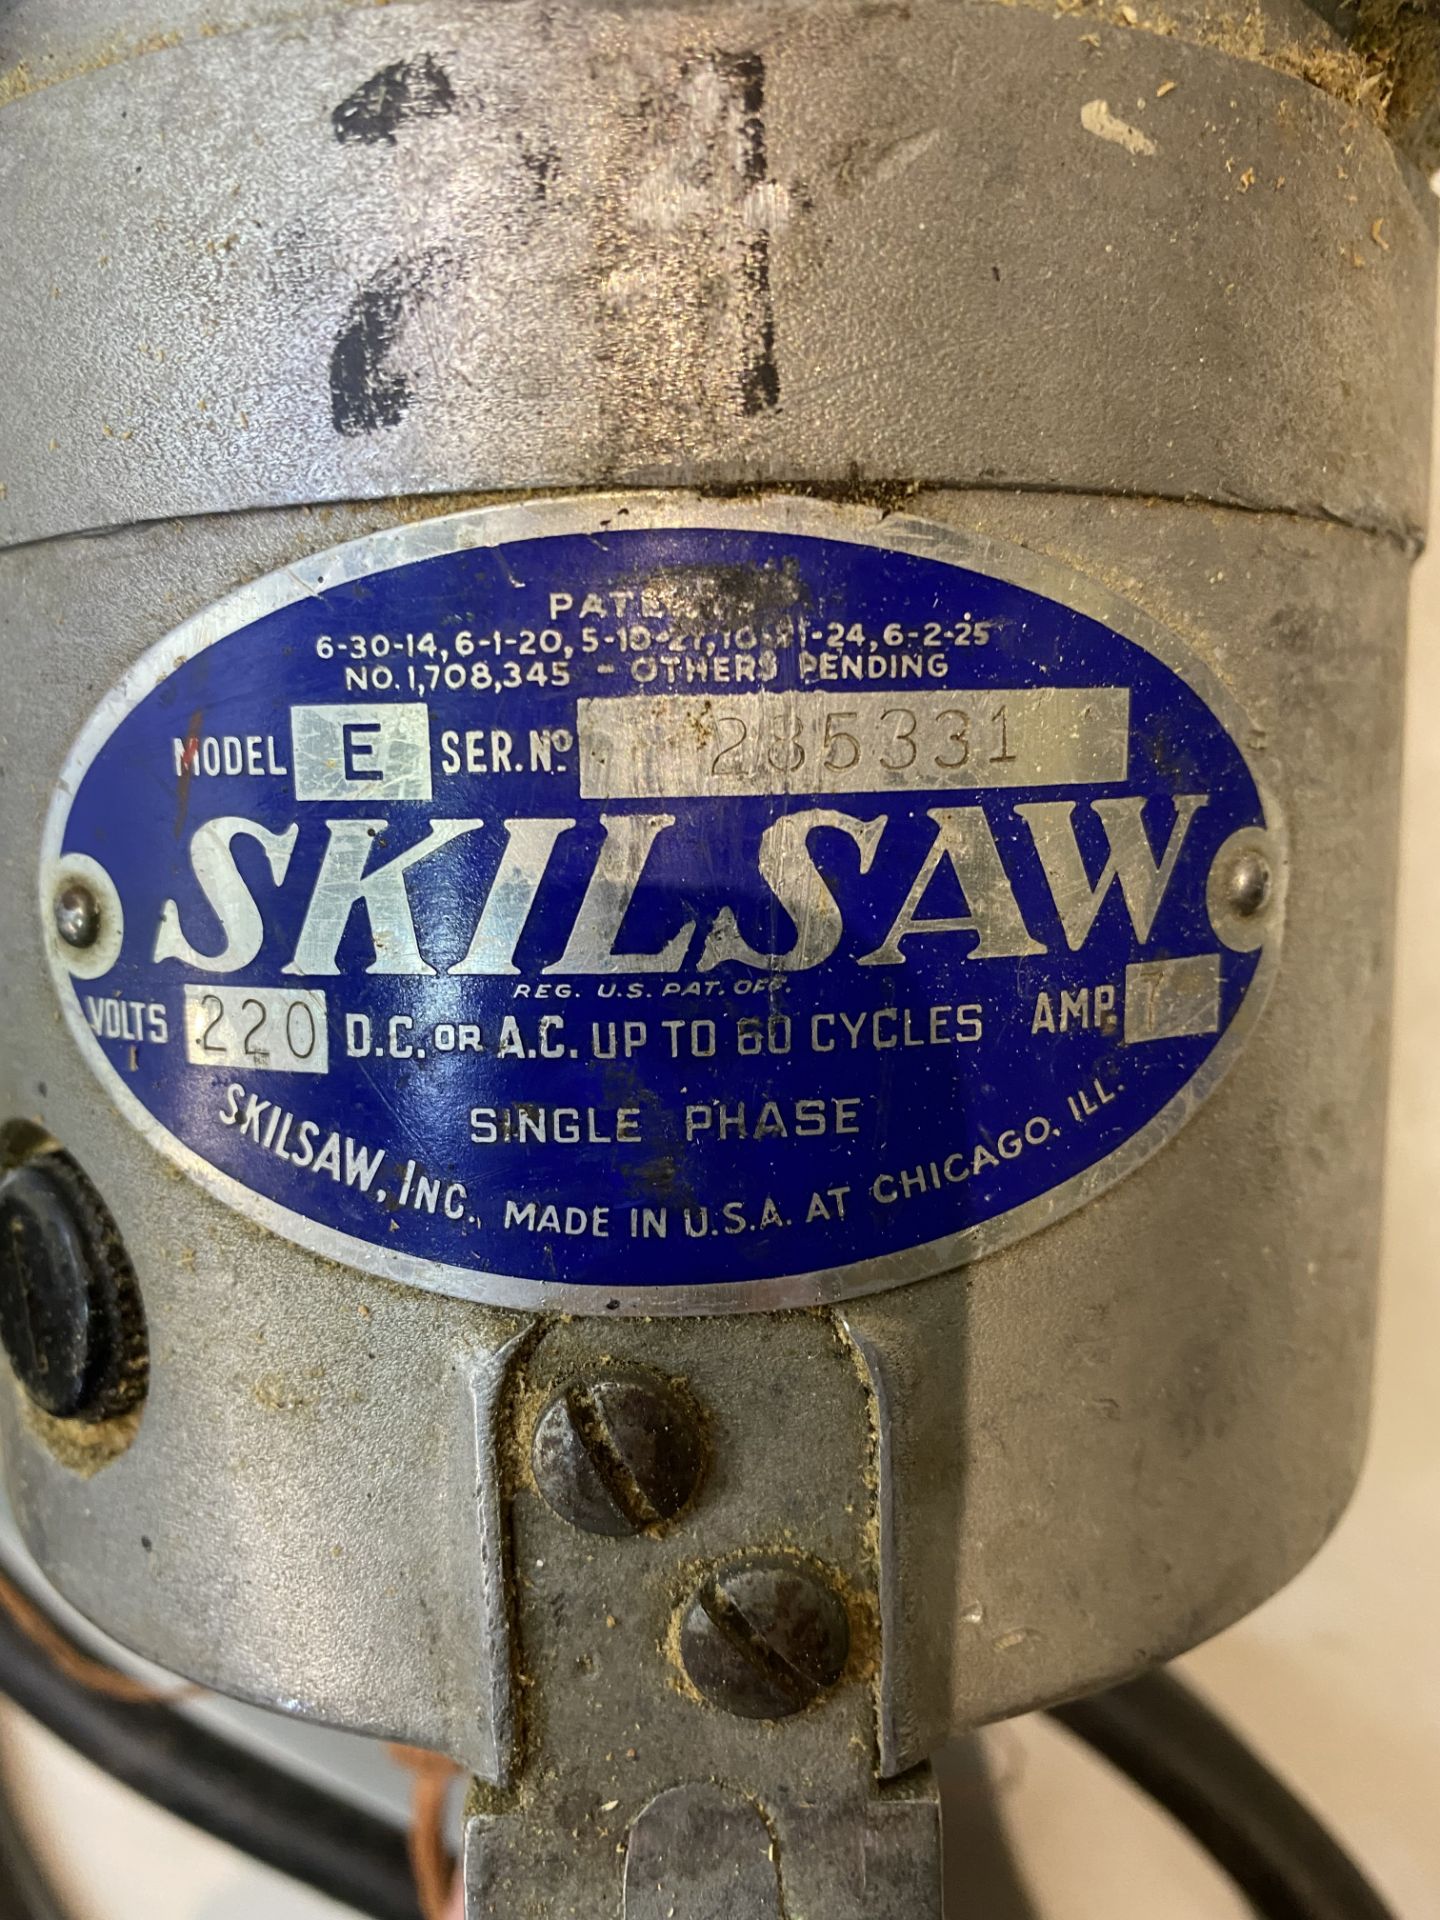 USED Skilsaw Model E Circular Saw - See Pictures - Image 4 of 4